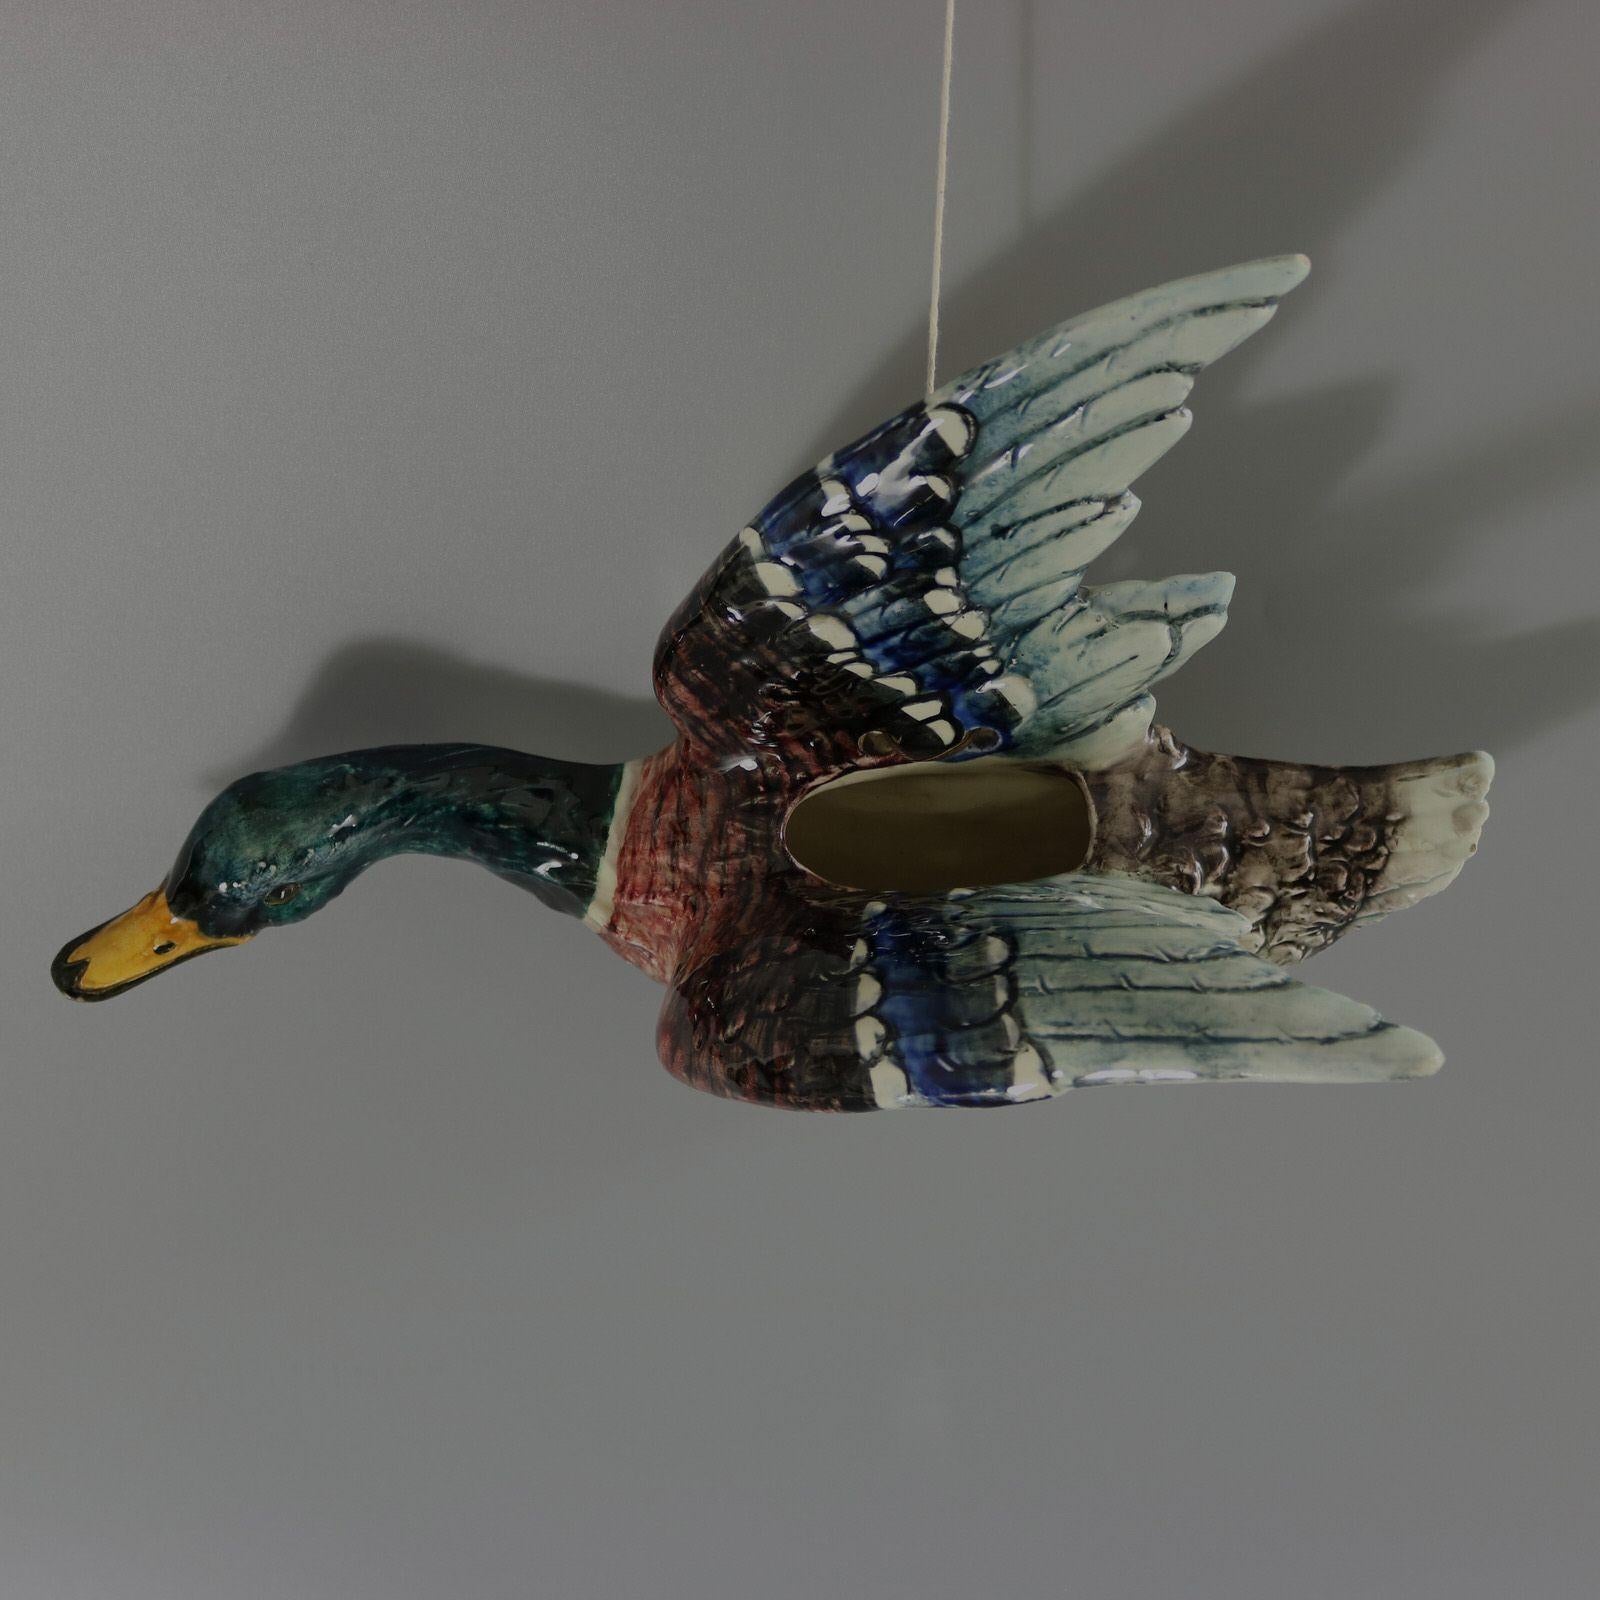 Delphin Massier Majolica wall pocket which features a duck (mallard) in flight, with wings raised. Colouration: white, pink, teal blue are predominant. The piece bears maker's marks for the Delphin Massier pottery.